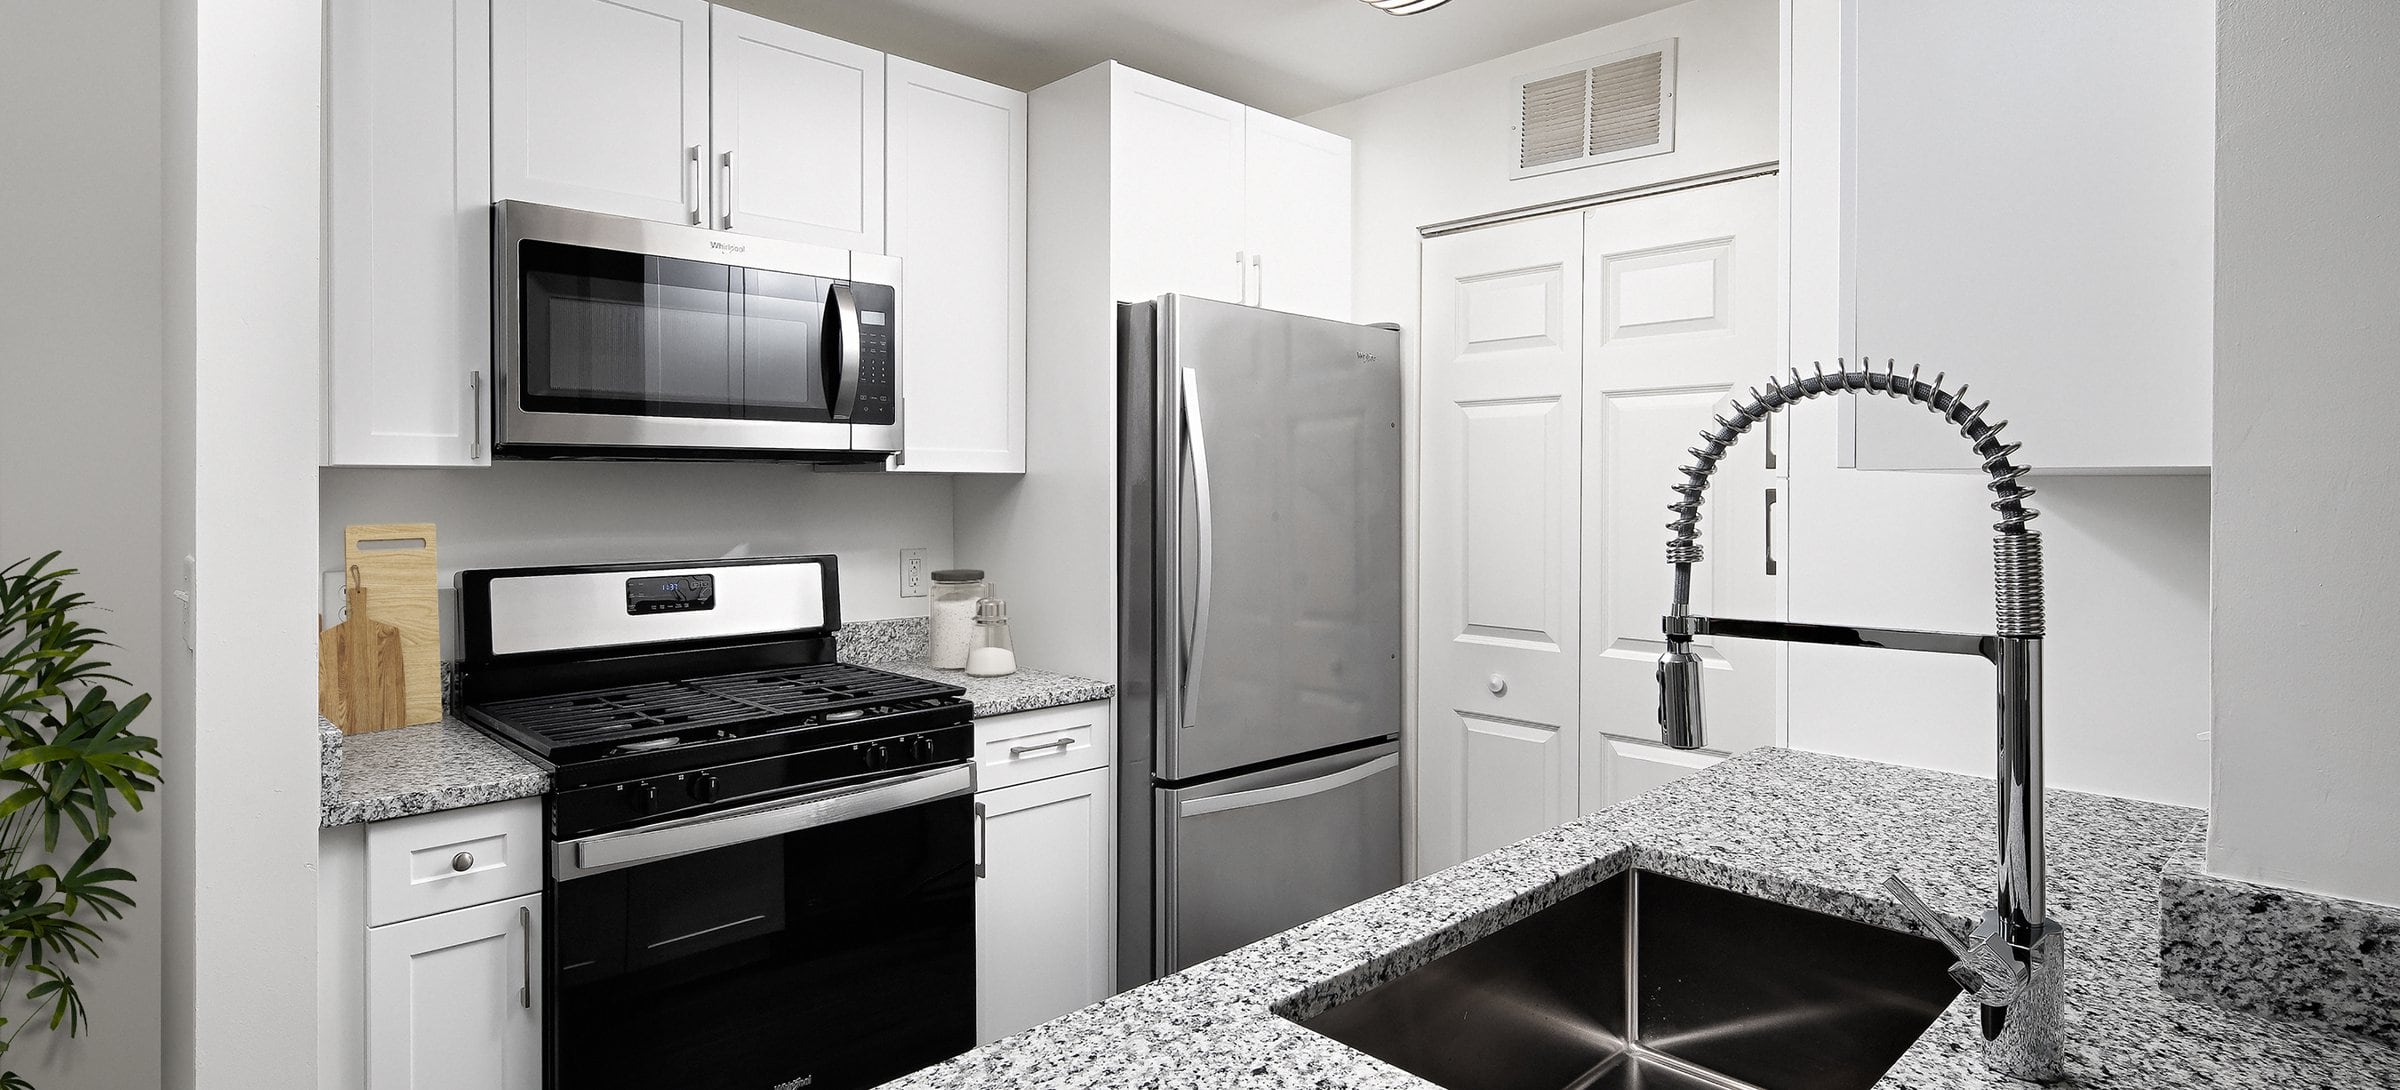 Phase I Renovated Package I apartment kitchen with white cabinetry, quartz countertops, and stainless steel appliances